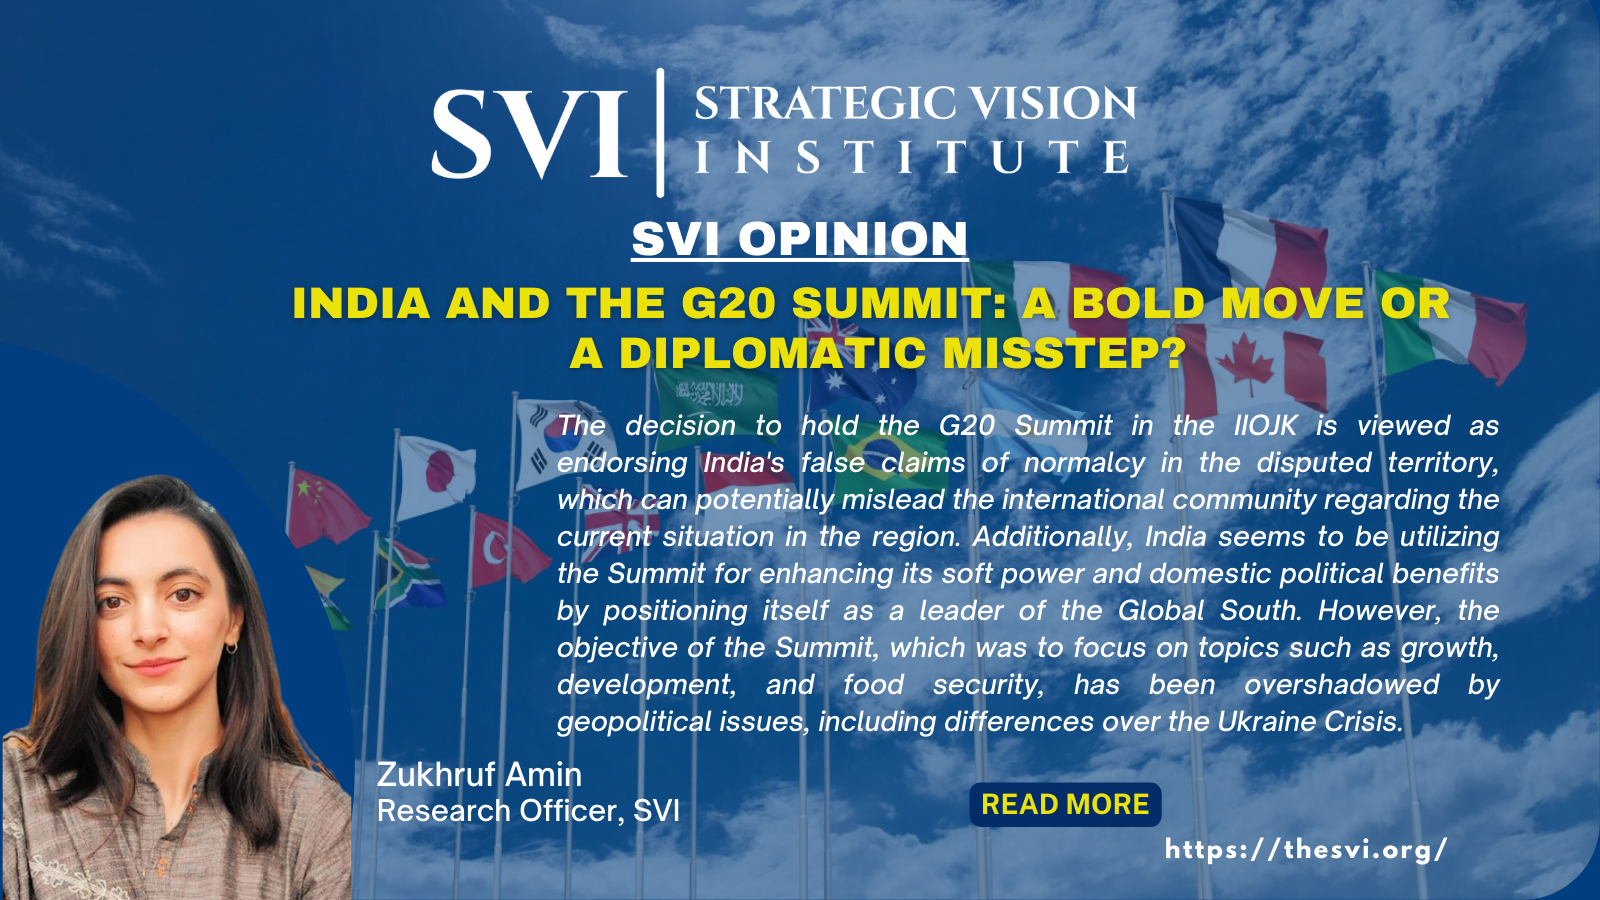 India and the G20 Summit: A Bold Move or a Diplomatic Misstep?